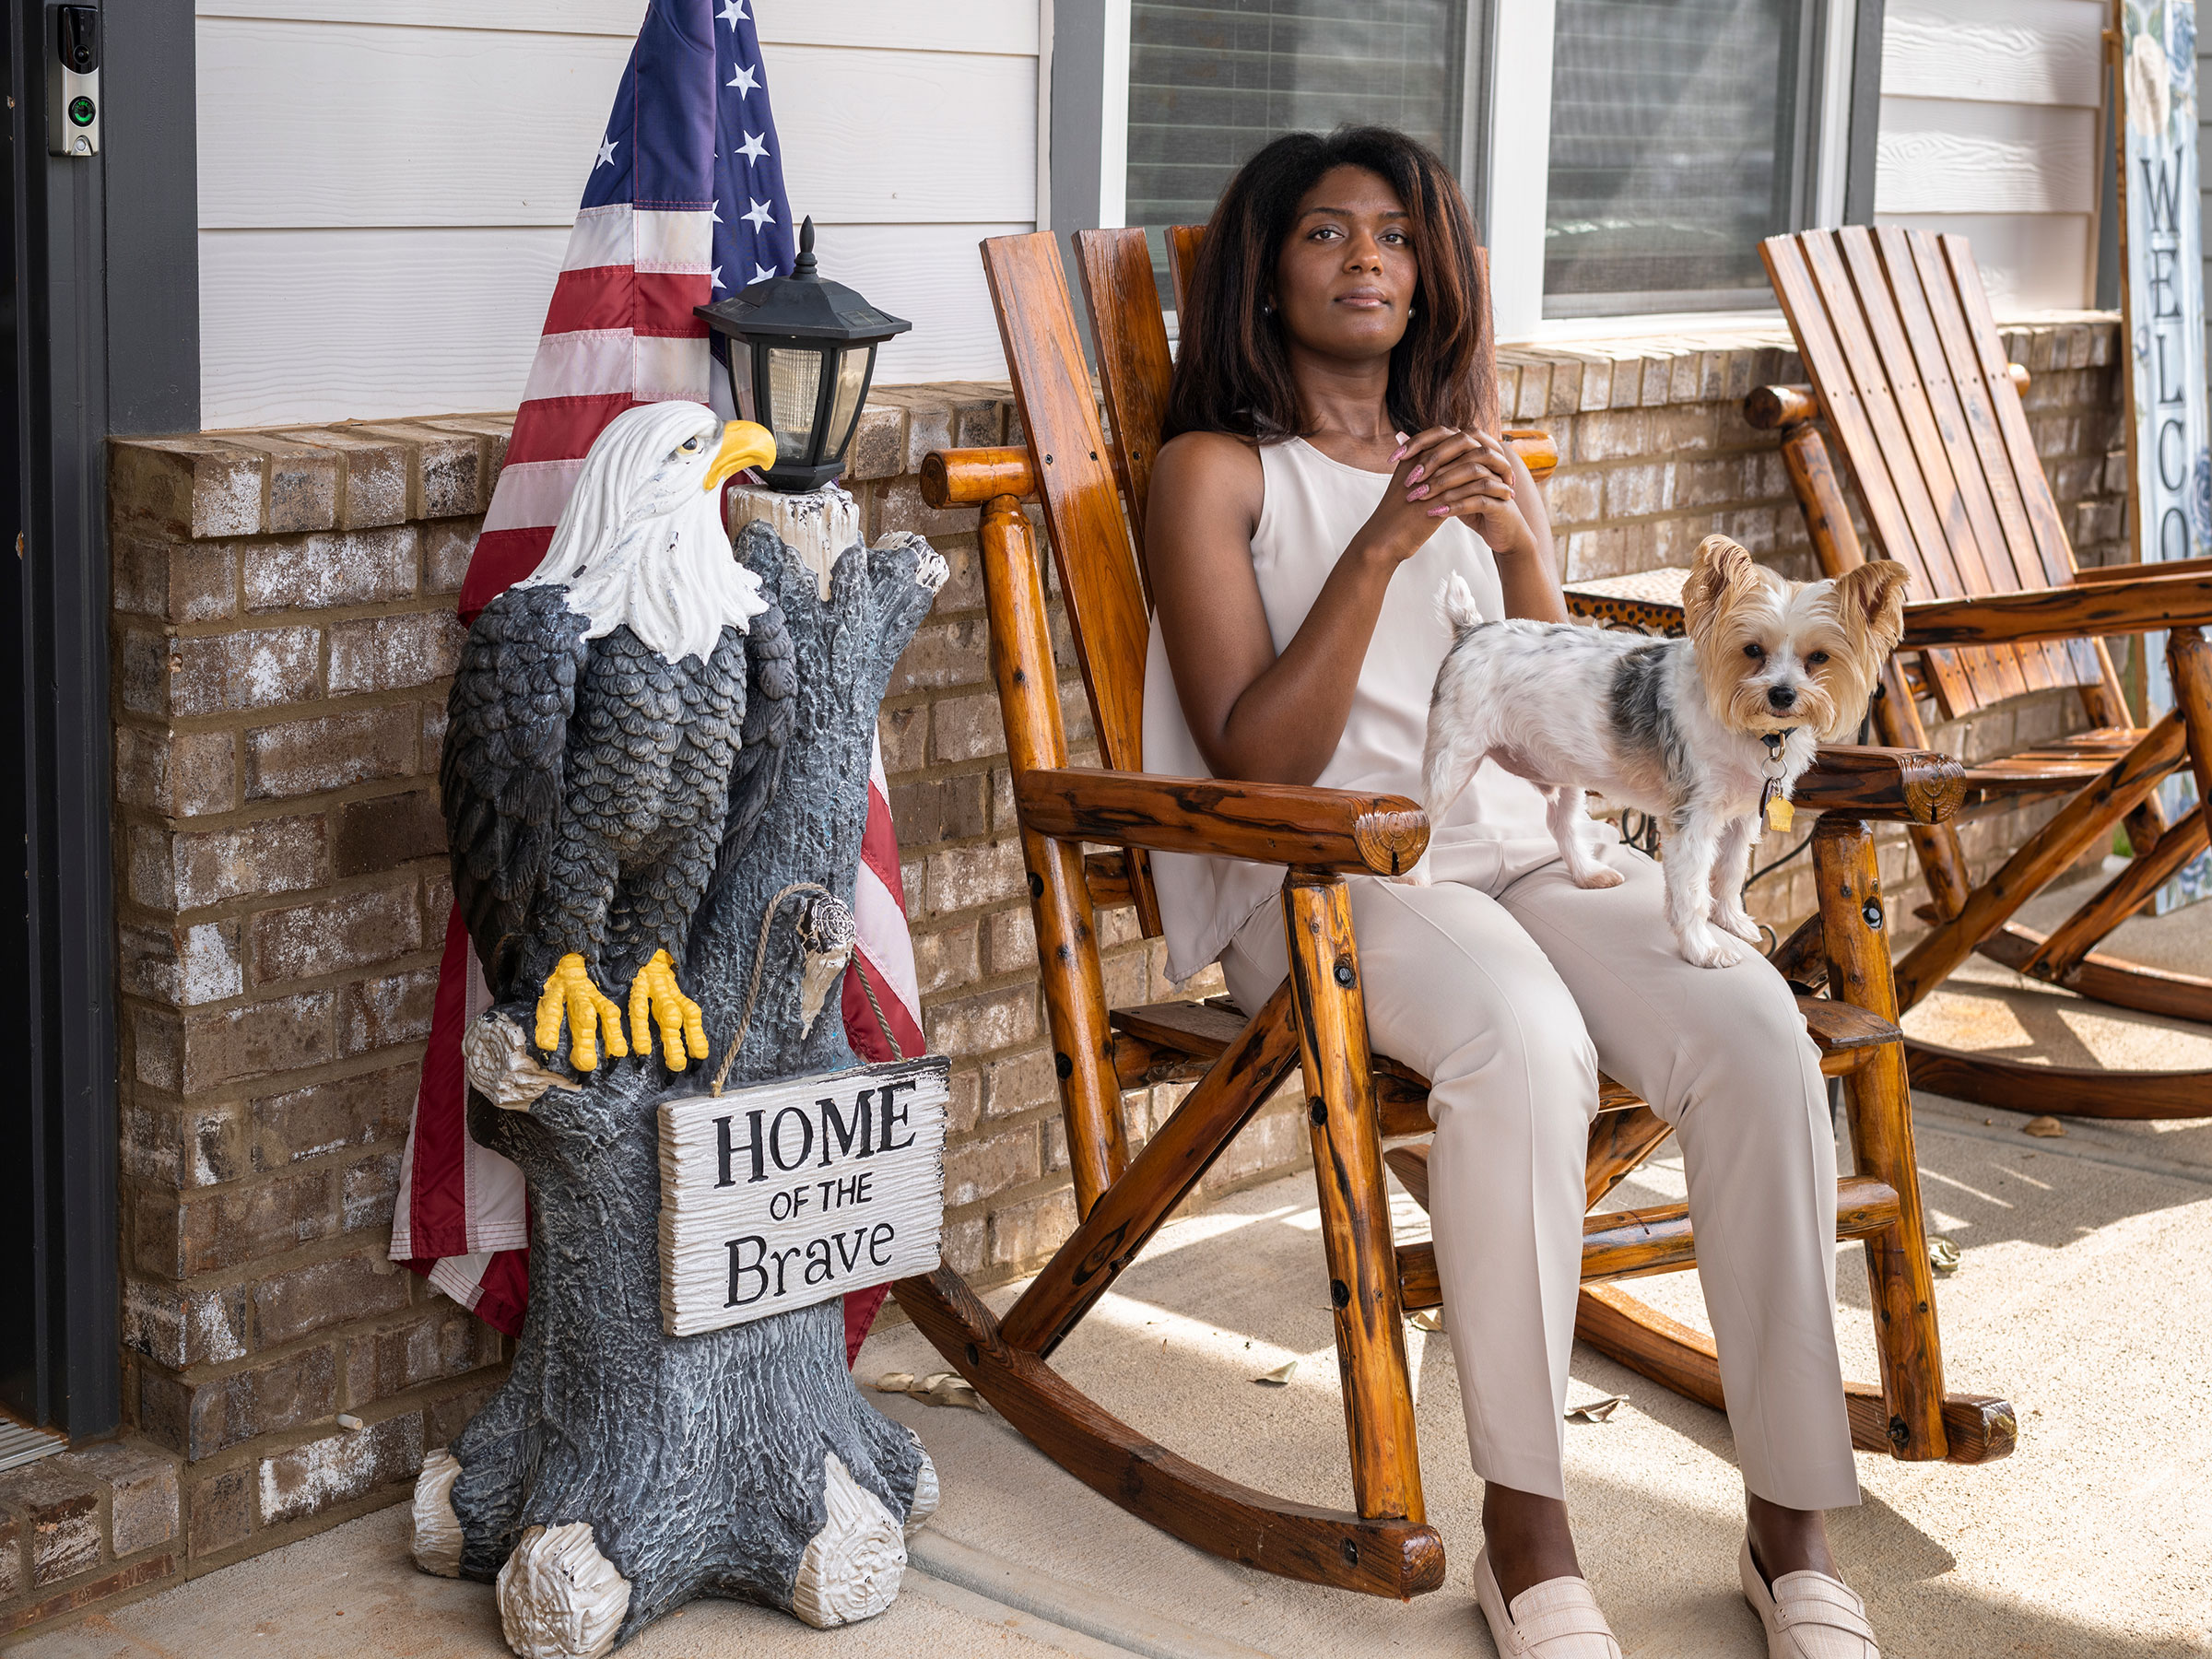 Jennifer Jones, whose voter registration was challenged, poses for a portrait at home in Fairburn, Ga. on Nov. 5. (Gillian Laub for TIME)